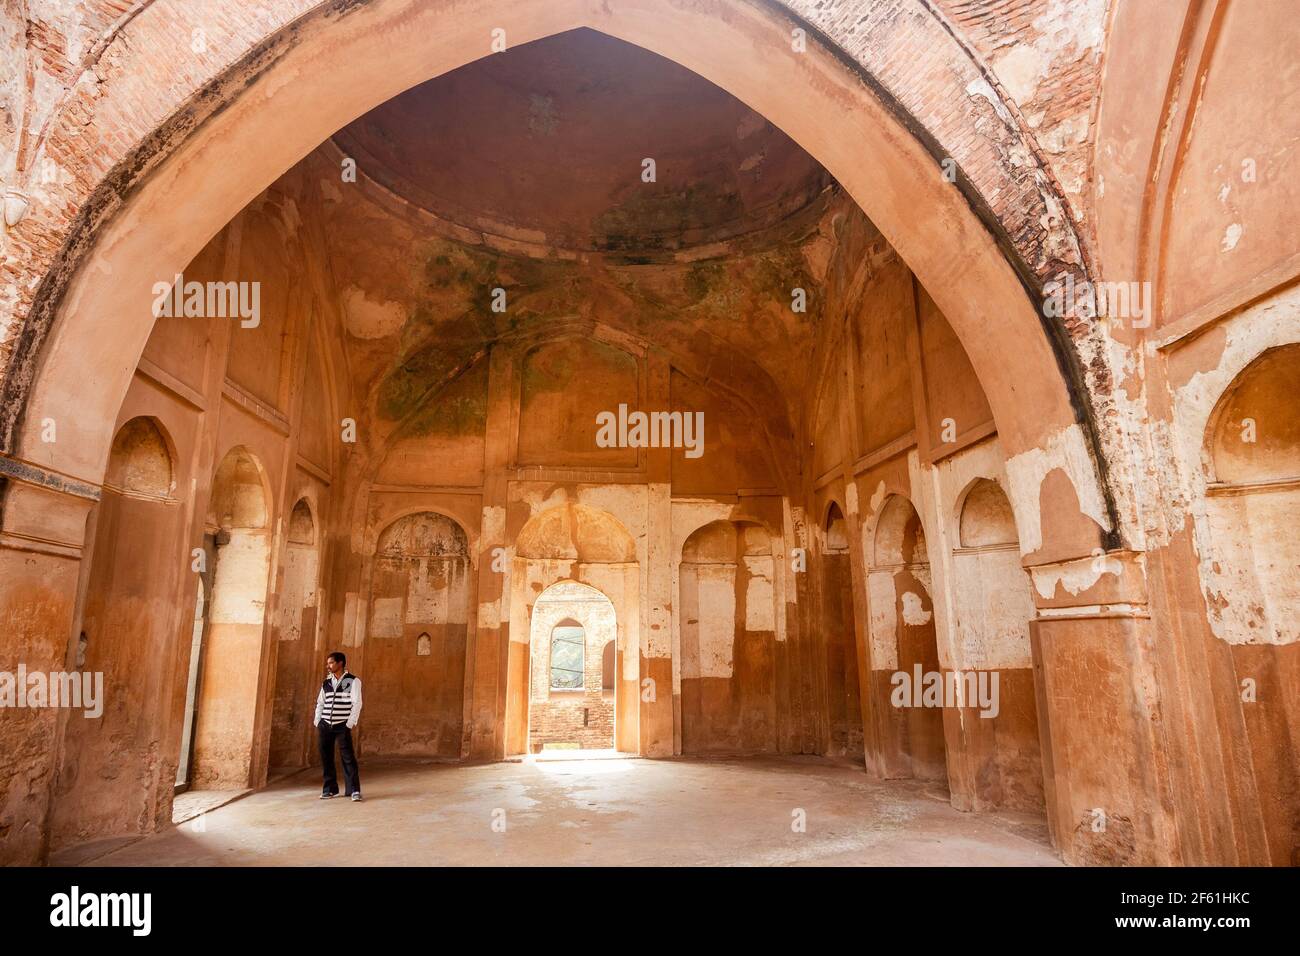 Murshidabad, West Bengal, India - January 2018: The arches of the ruins of the ancient Katra Masjid mosque in the town of Murshidabad. Stock Photo